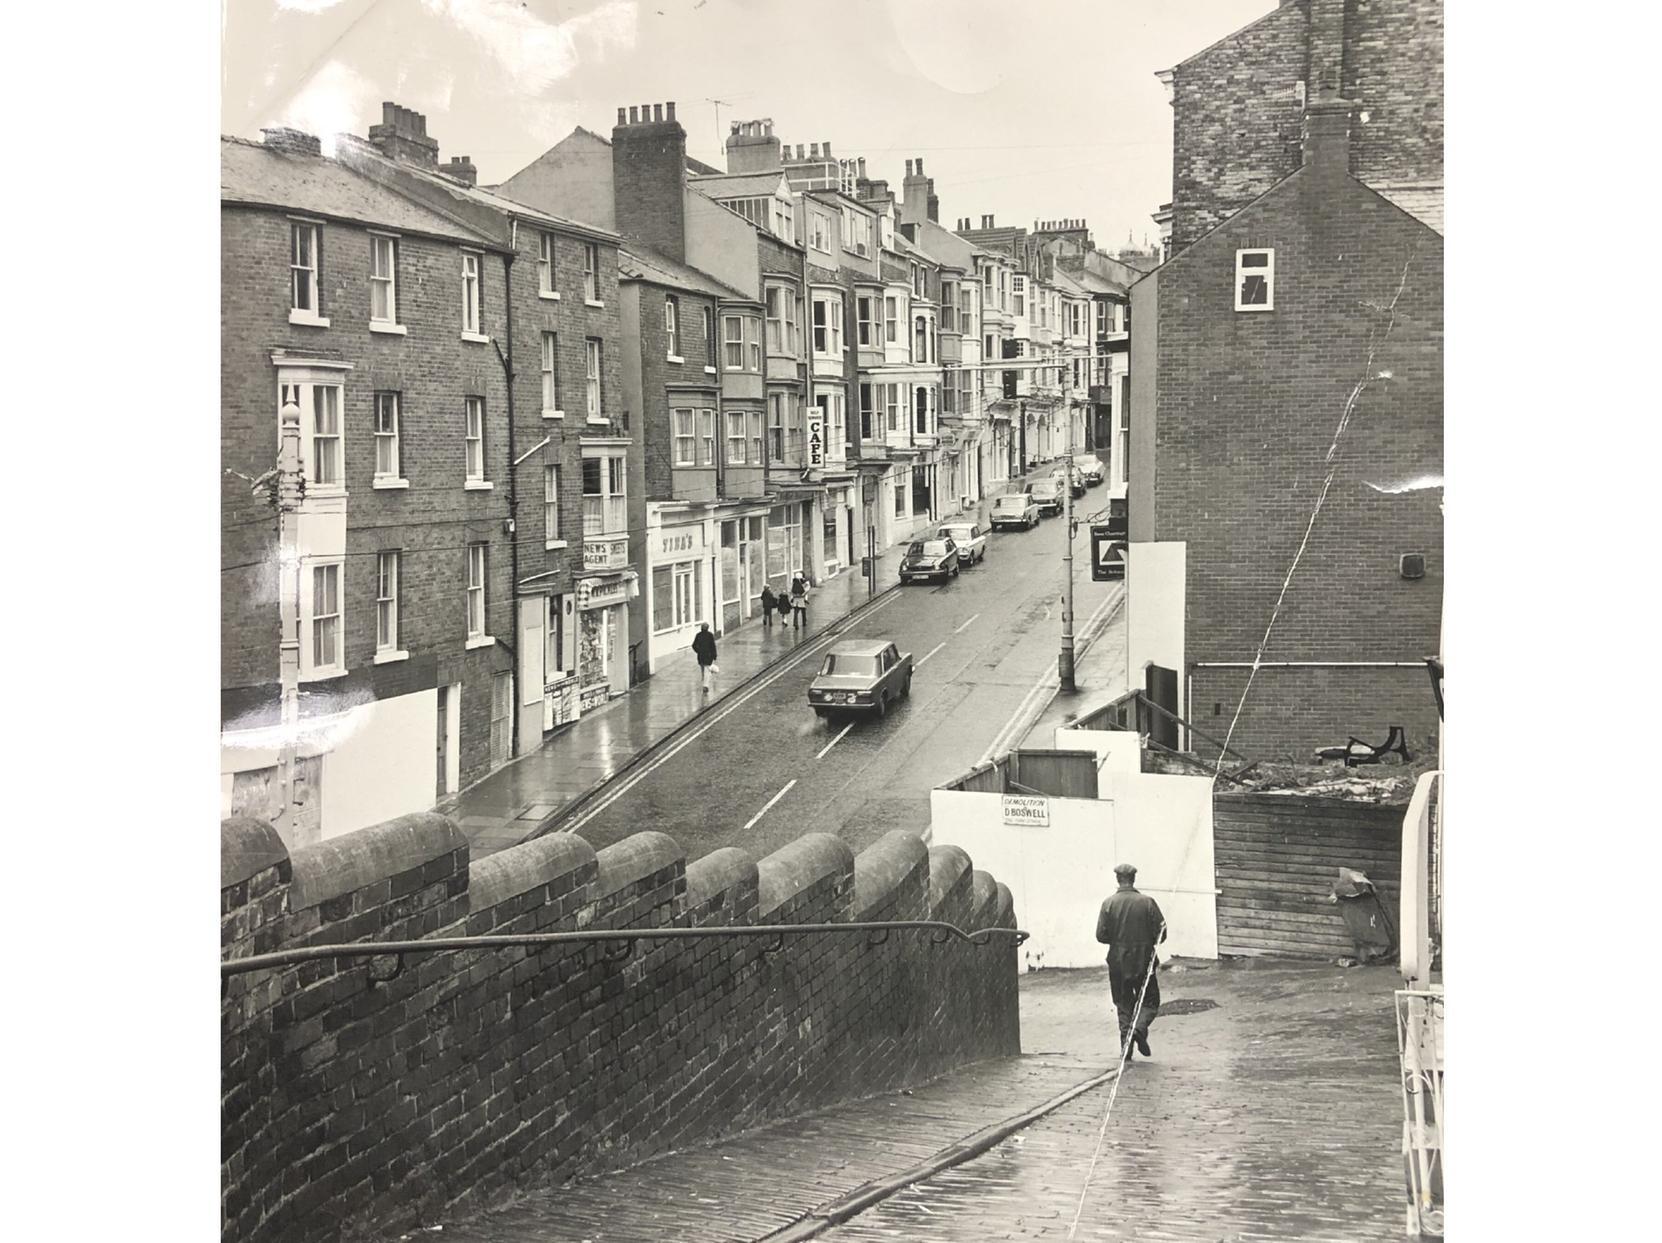 A man walks down West Sandgate towards the bottom of Eastborough. The shop on the corner has not yet become The Joke Shop - do you know which year or decade this was?